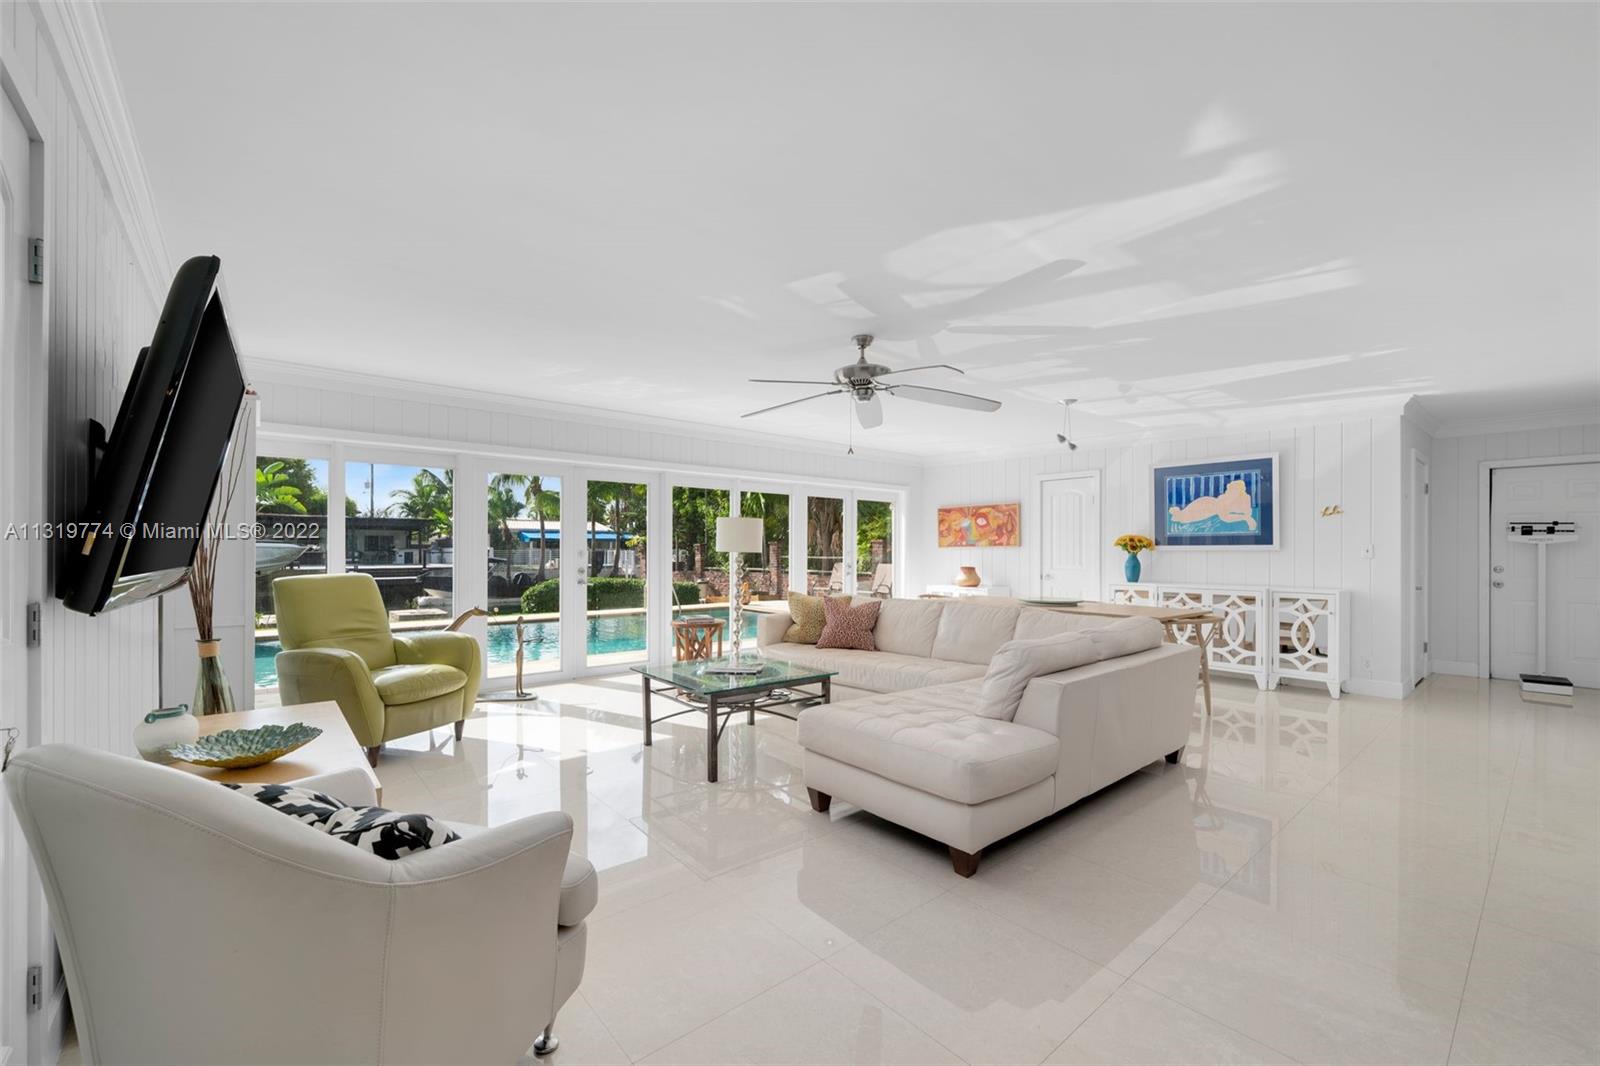 A perfect family home in one of the most family-friendly neighborhoods in Miami Beach, Biscayne Point. This beautiful Mid-Century home is bright and open with great views of the pool and canal waterway as you enter. A formal living room, family room and dining room provide ample space for daily living and entertaining. Porcelain tile floors throughout the main living areas. Impact windows & doors, cabana bath, spacious carport, covered backyard patio and 60 ft. of waterfront with room for a boat lift. This beautiful and tranquil island community has 24 hour guard-gated security and is located just blocks from the beach.